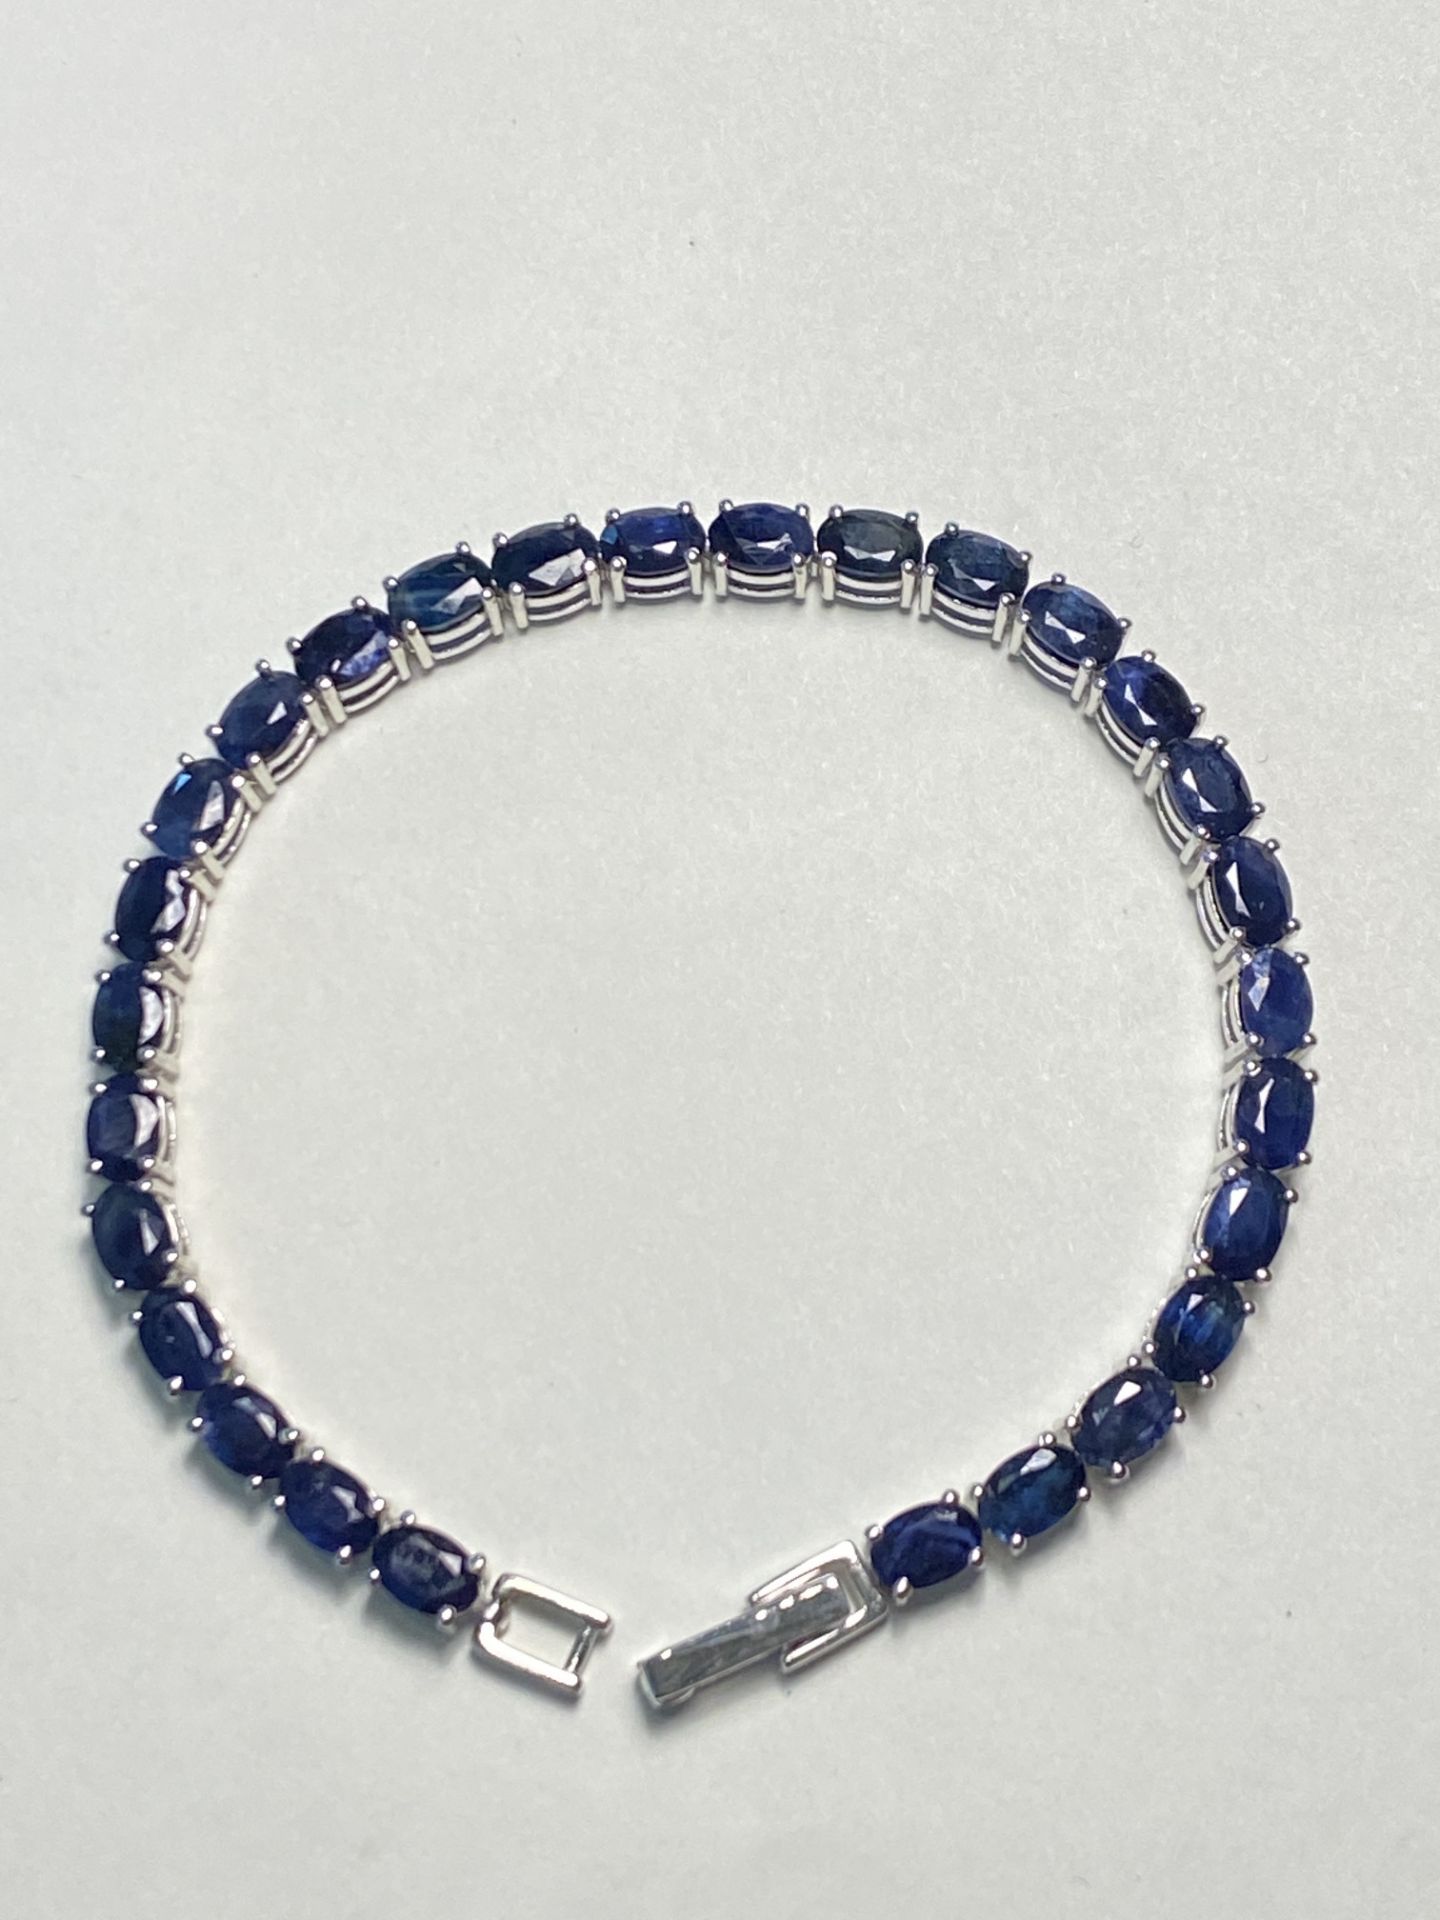 APPROX 8.00ct NATURAL BLUE SAPPHIRE SET TENNIS BRA - Image 2 of 2